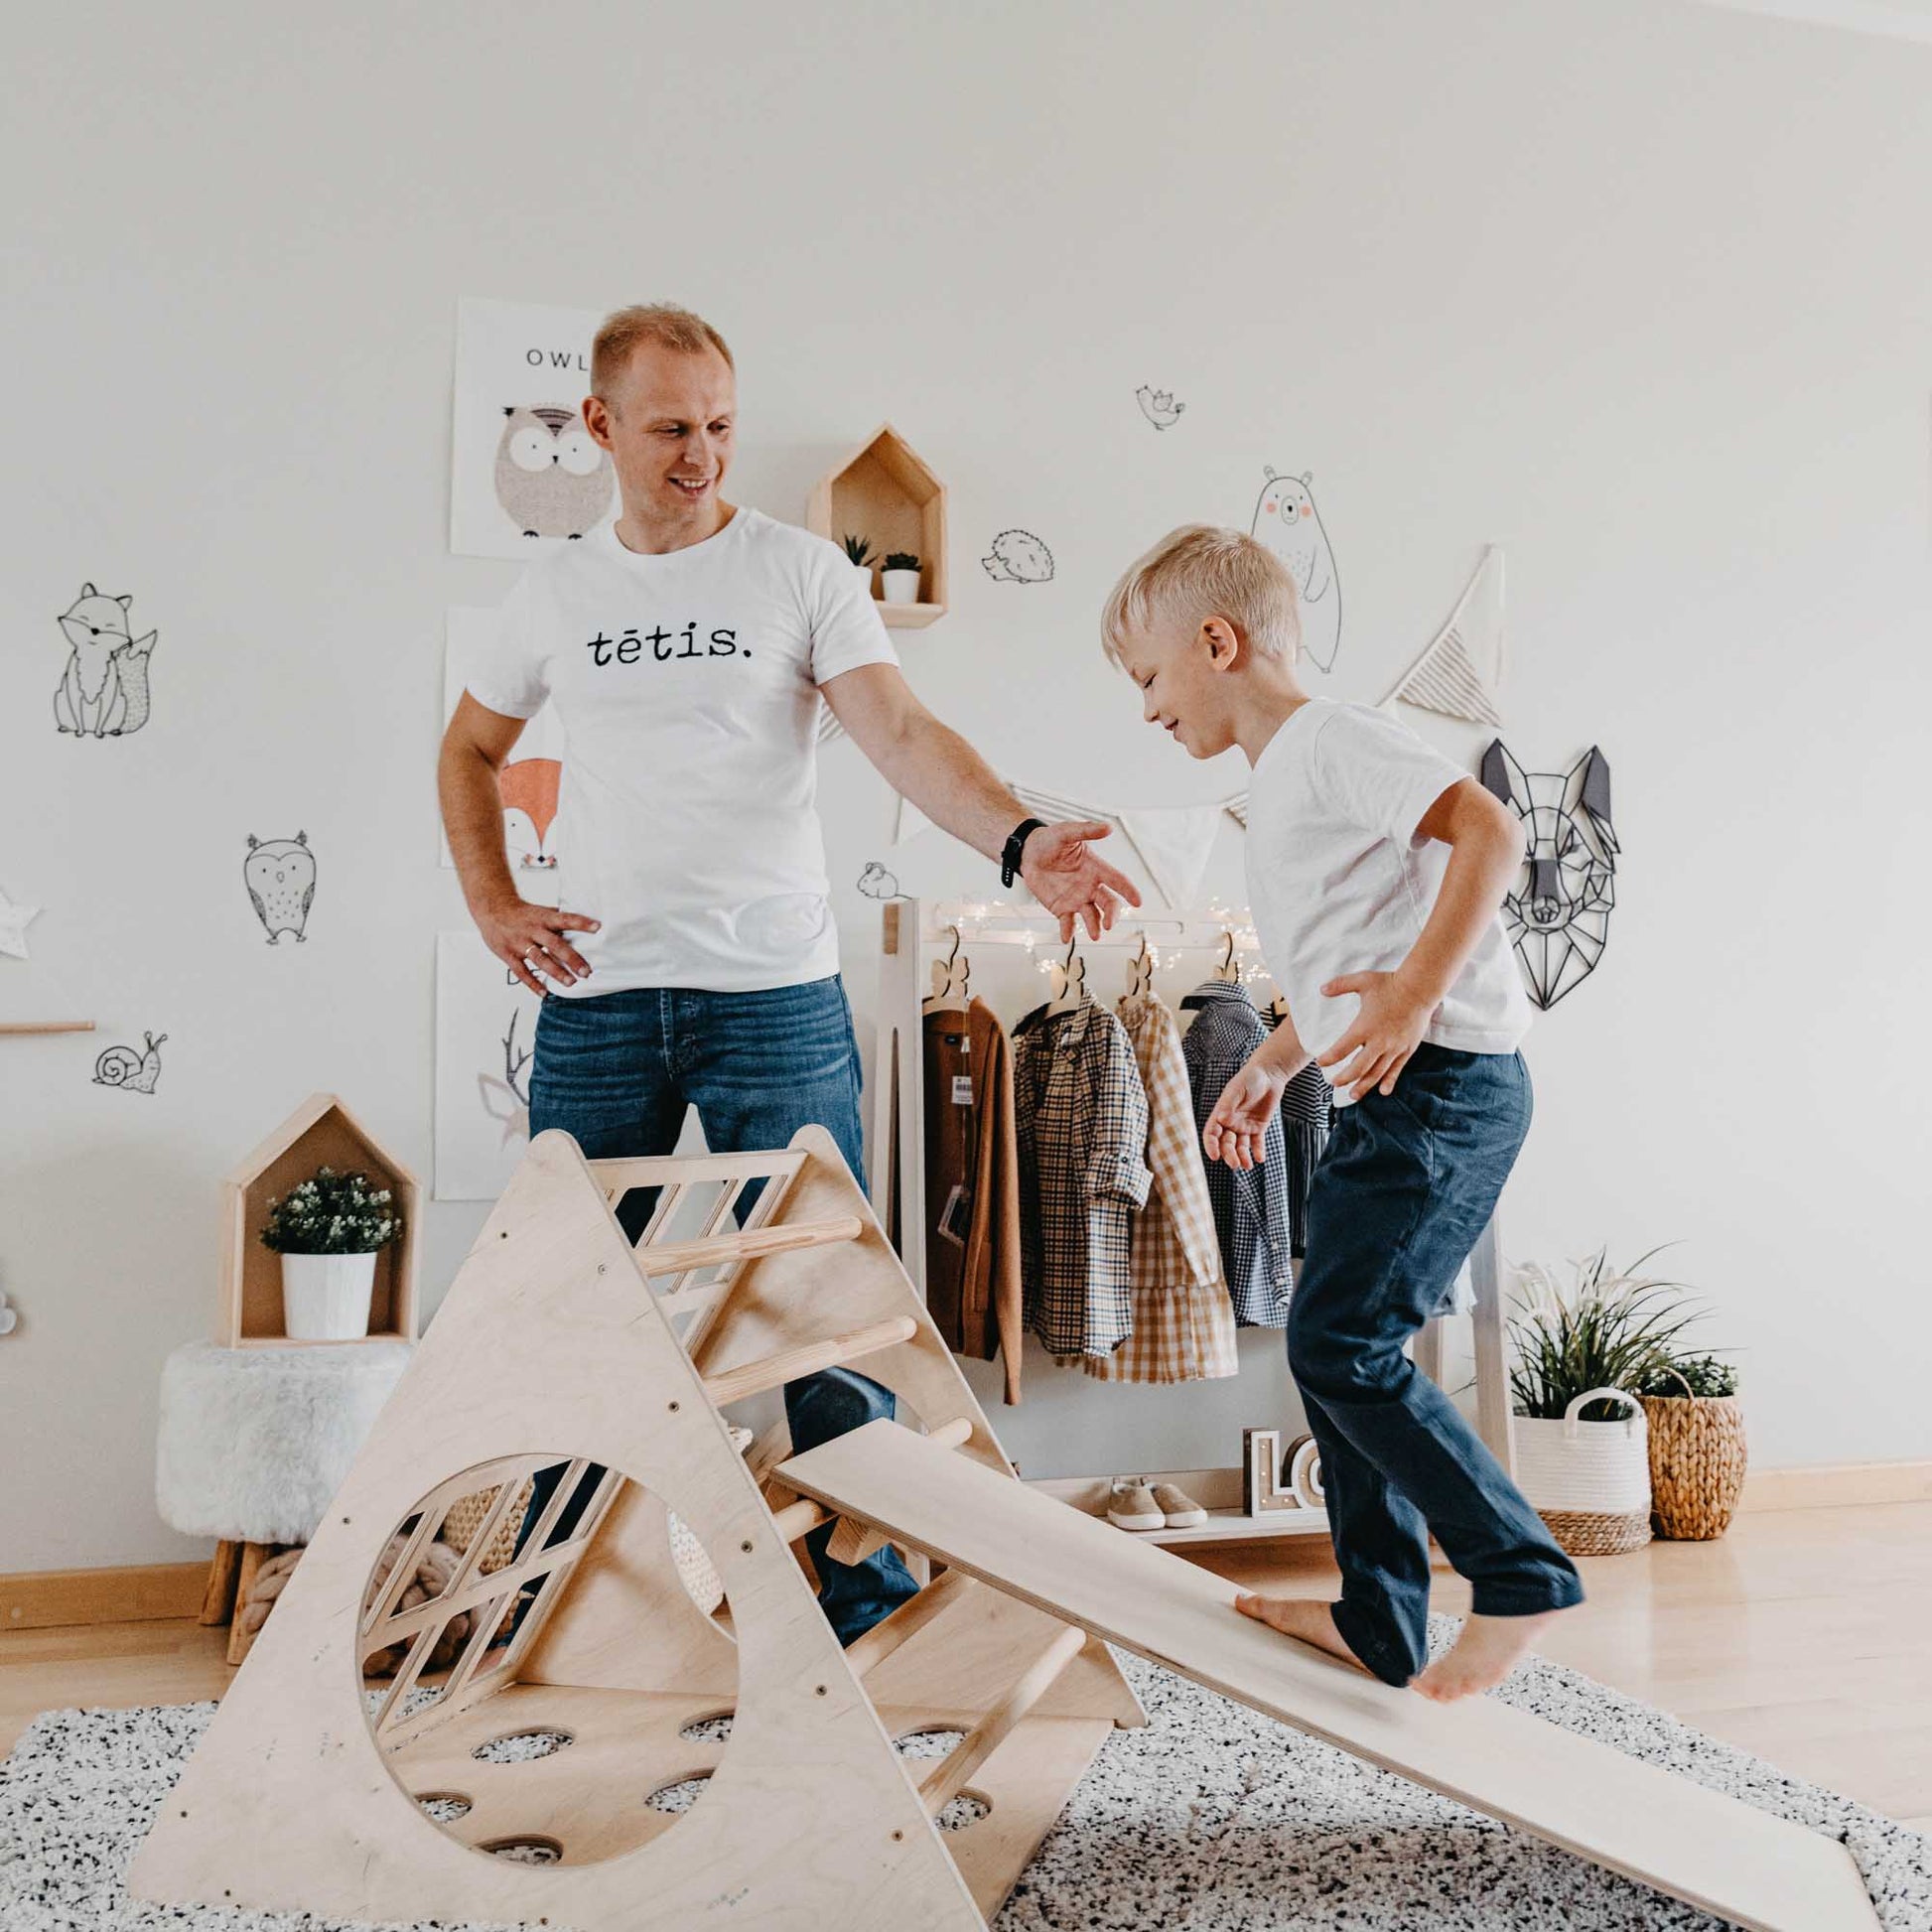 A man and his son enjoying Montessori-inspired wooden toys in a room, including a Climbing Triangle + Climbing Arch + a ramp.